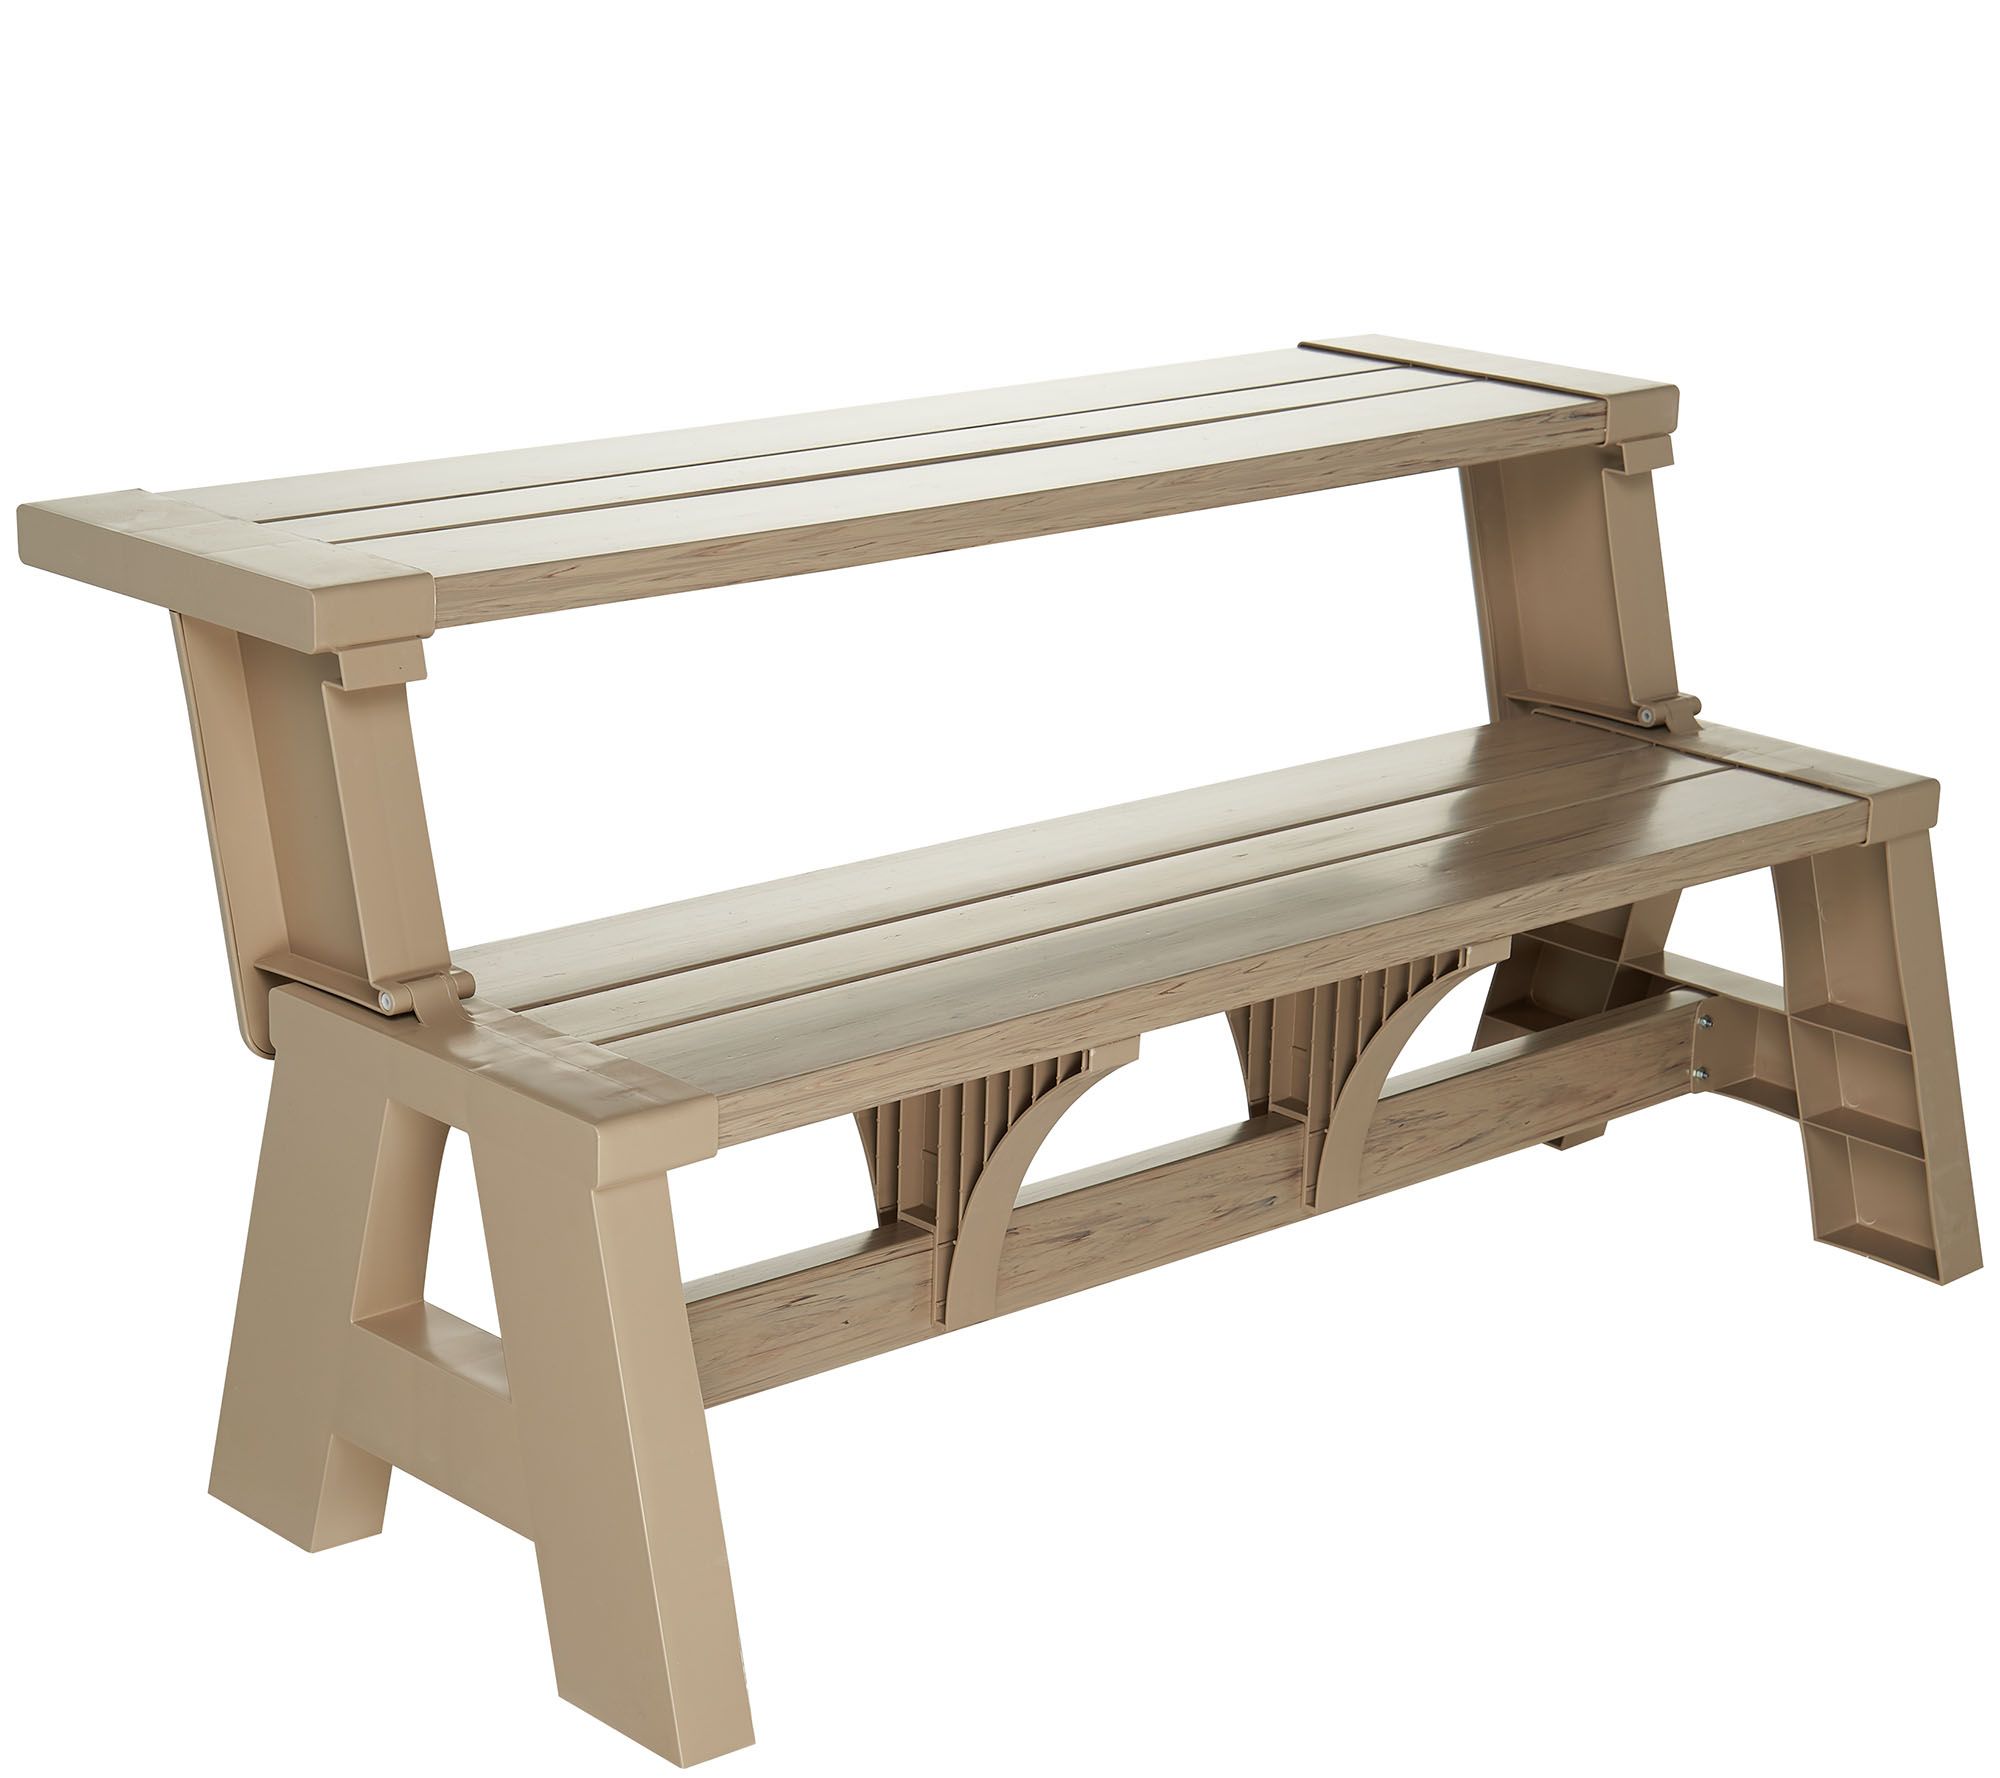 convert-a-bench 2-in-1 outdoor bench-to-table — qvc.com